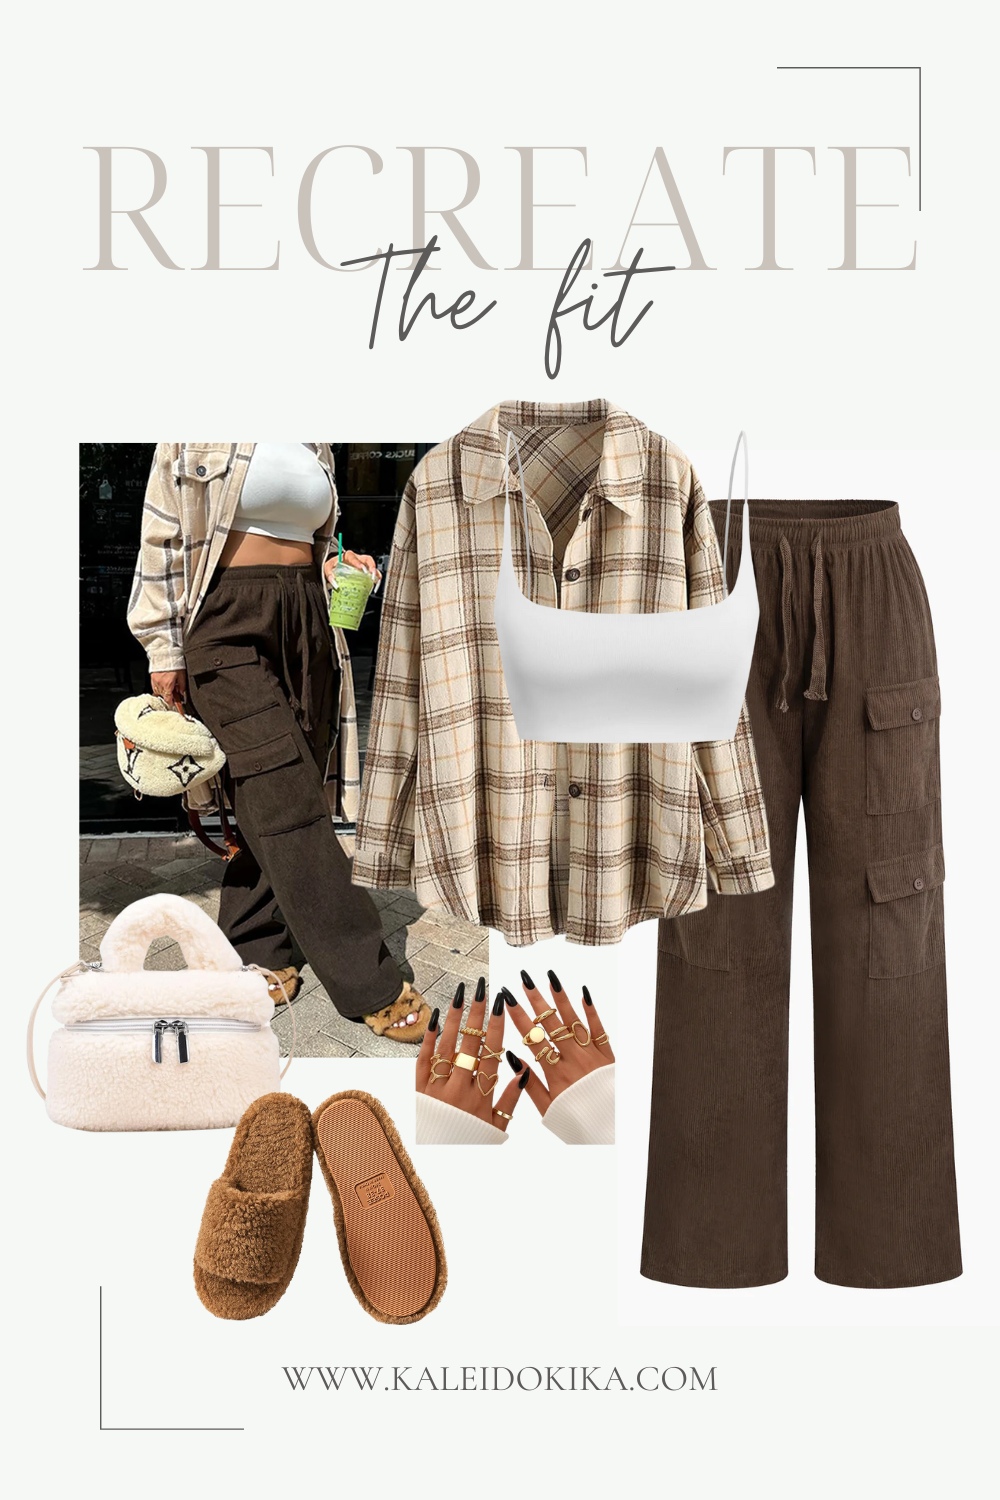 Image showing how to recreate a cozy spring outift